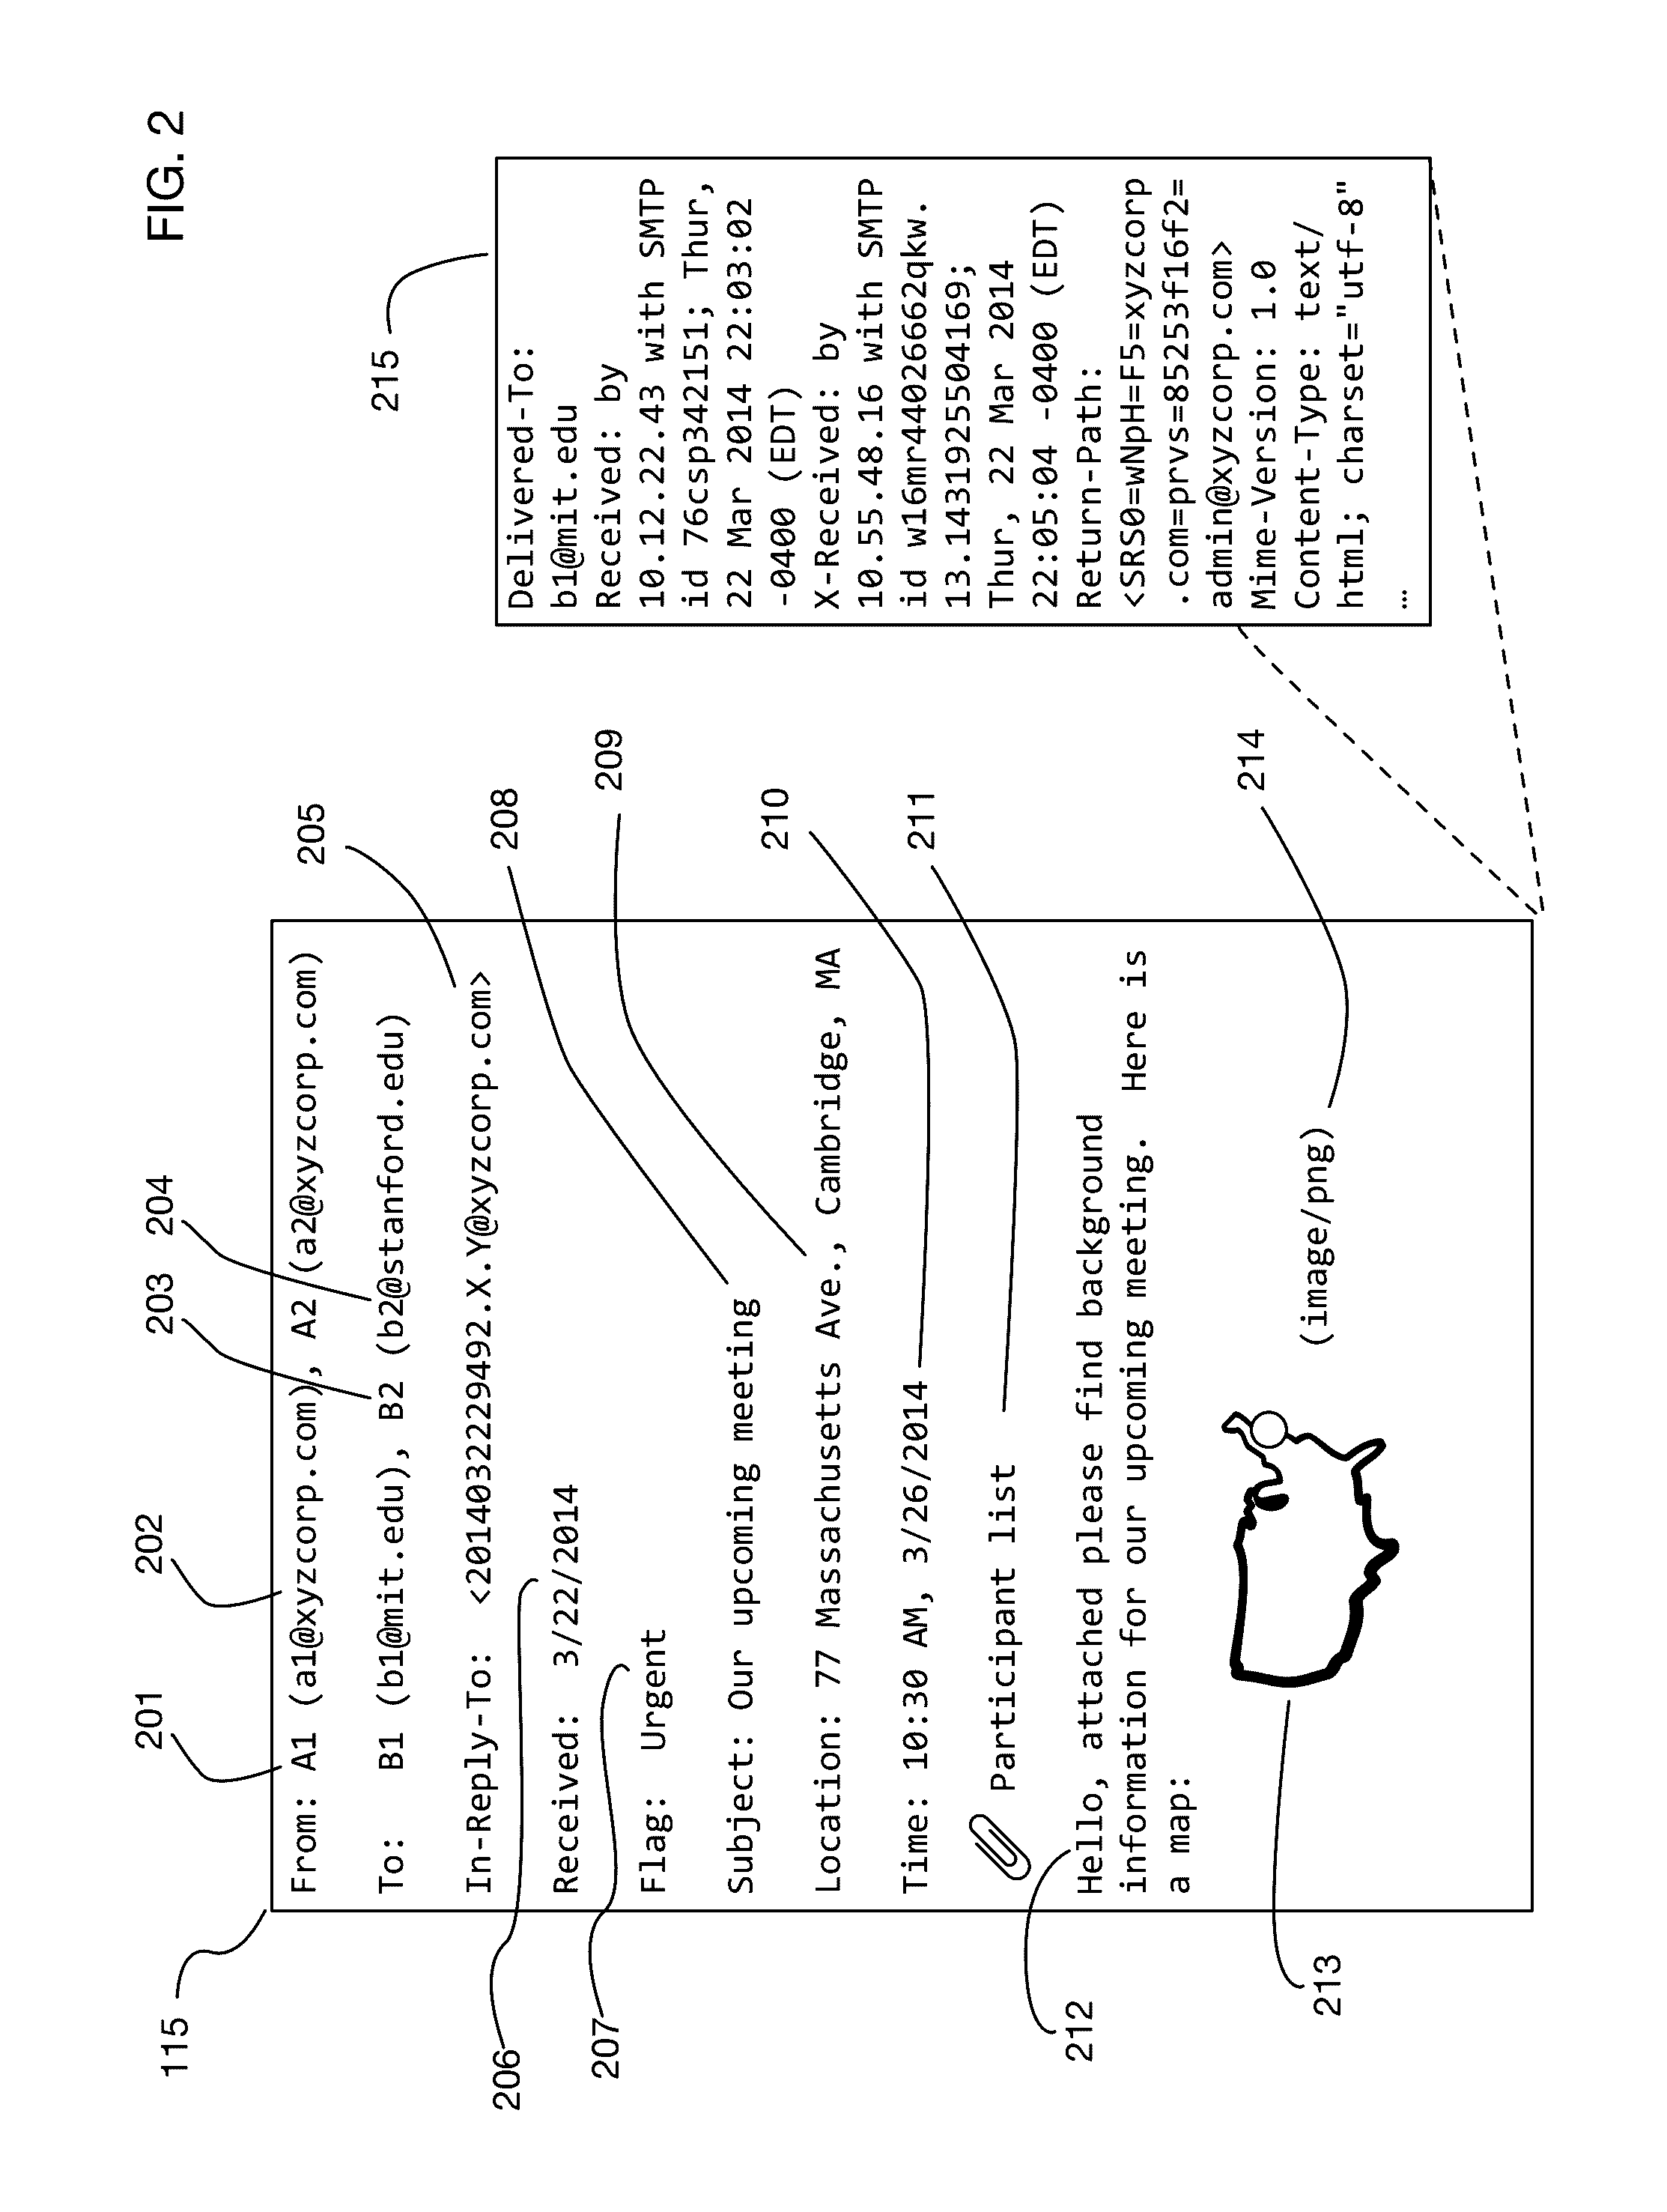 System for annotation of electronic messages with contextual information